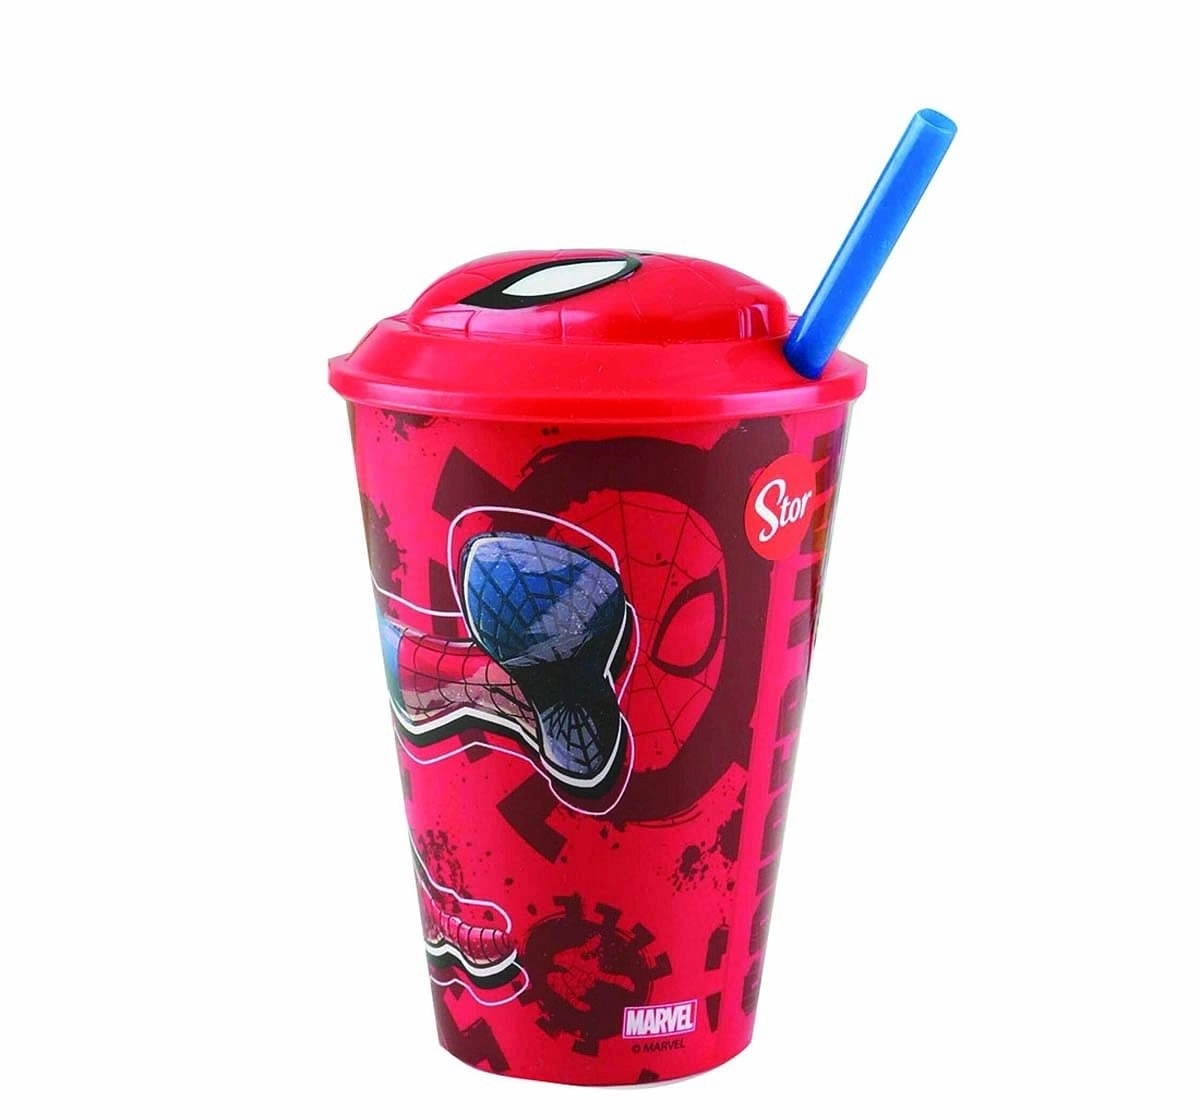 Marvel Stor 3D Straw Tumbler Spiderman 415 M Lfor Age 3Y+ (Red)